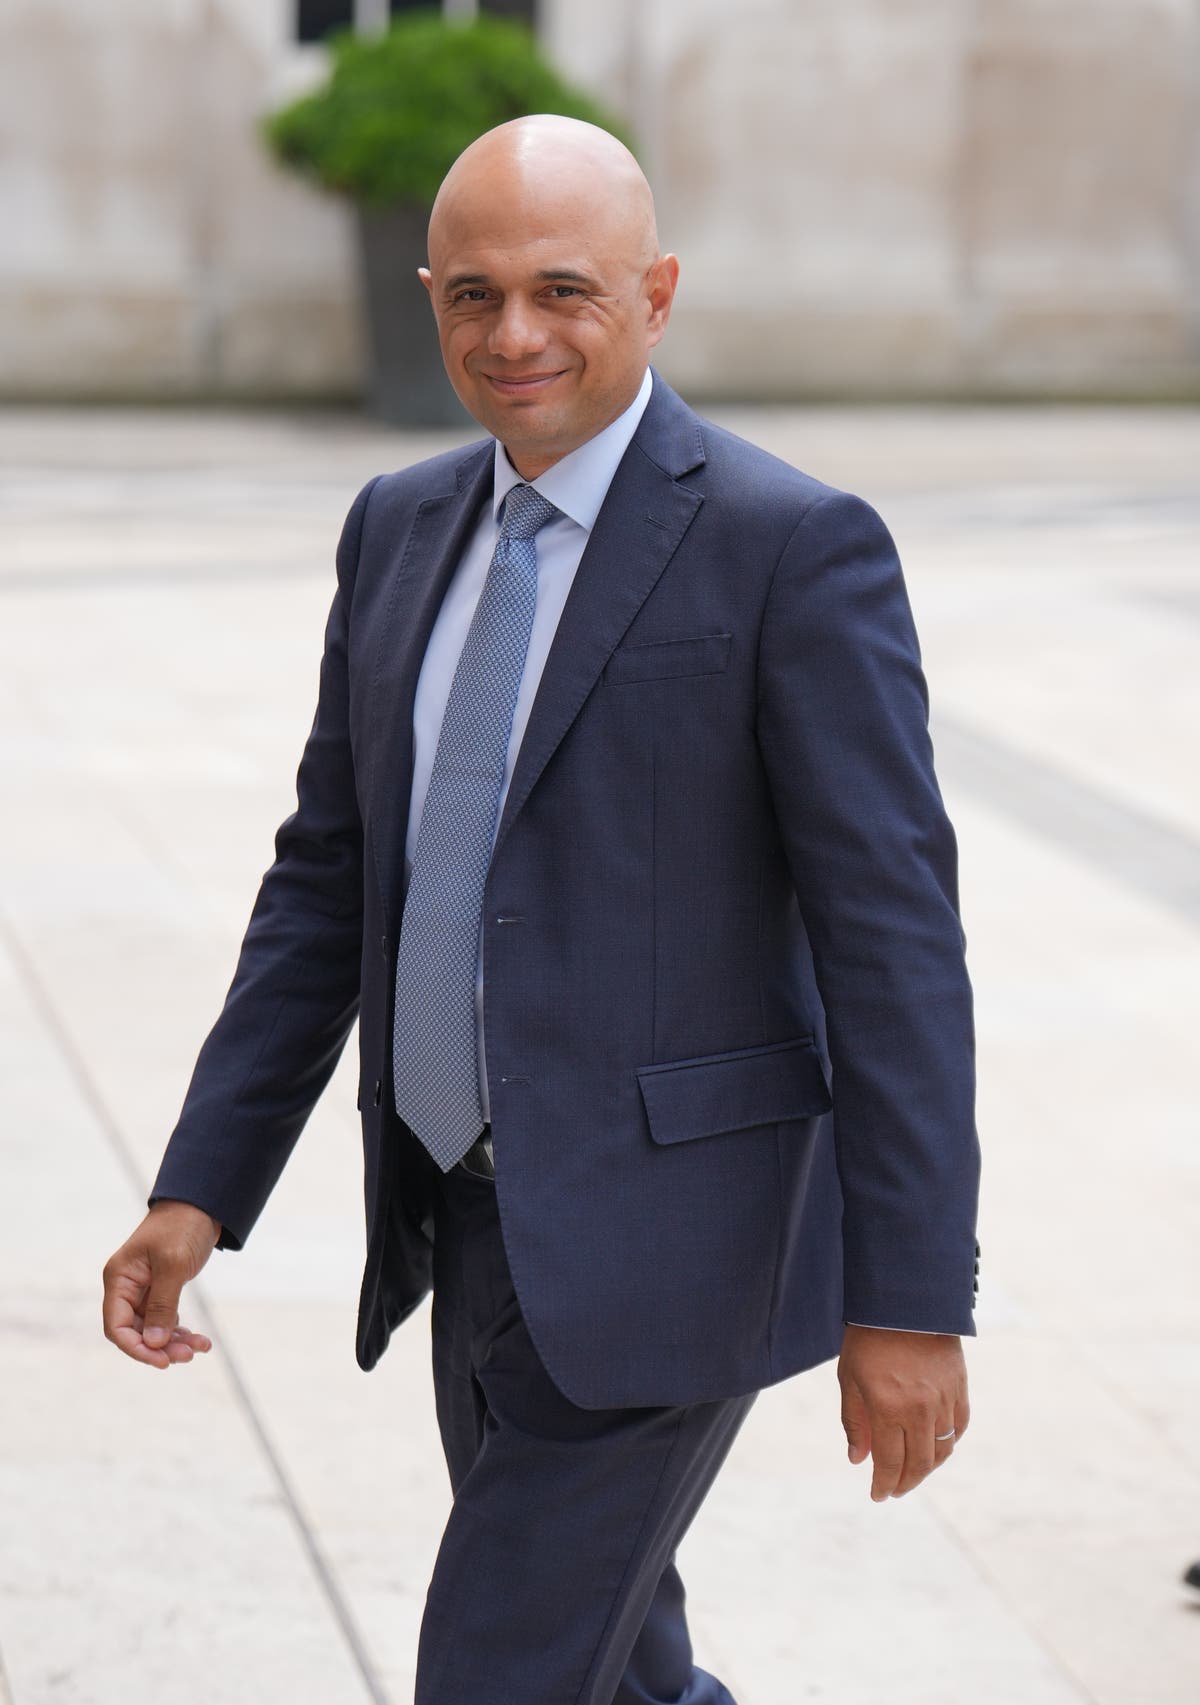 Javid ‘considering’ independent review into ambulance trust accused of cover ups